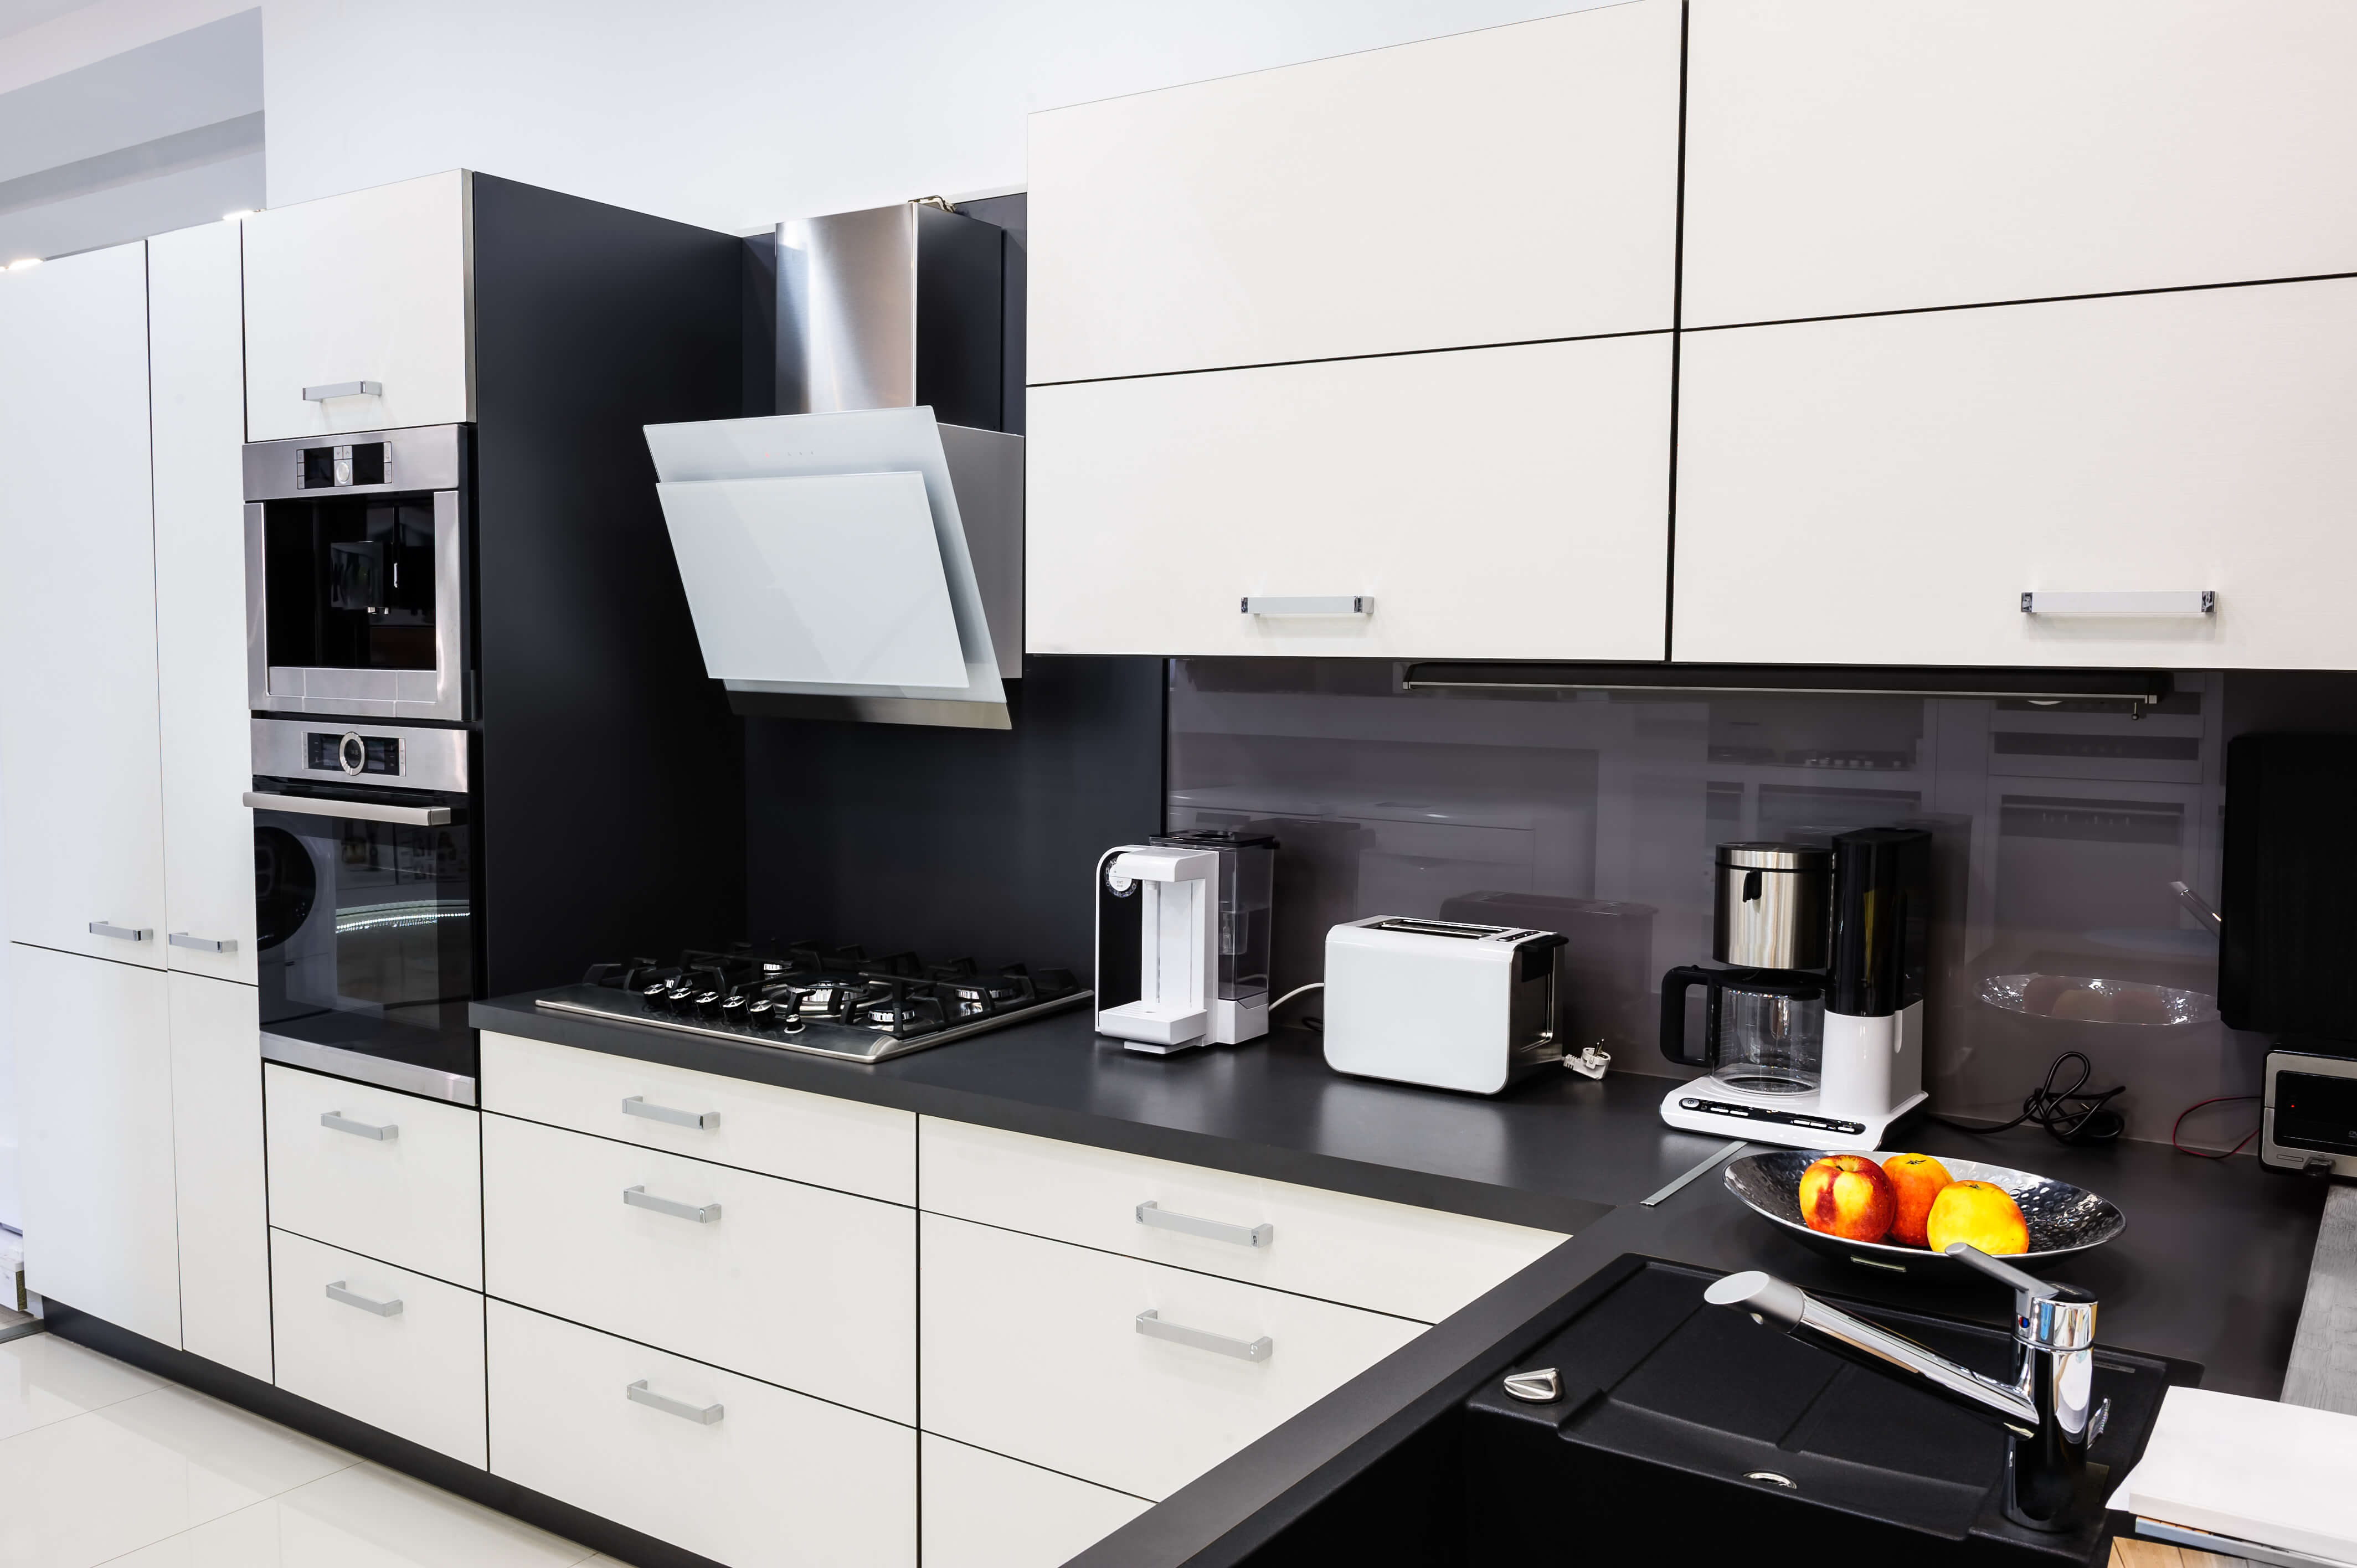 A modern kitchen with white cabinetry and black counter tops.